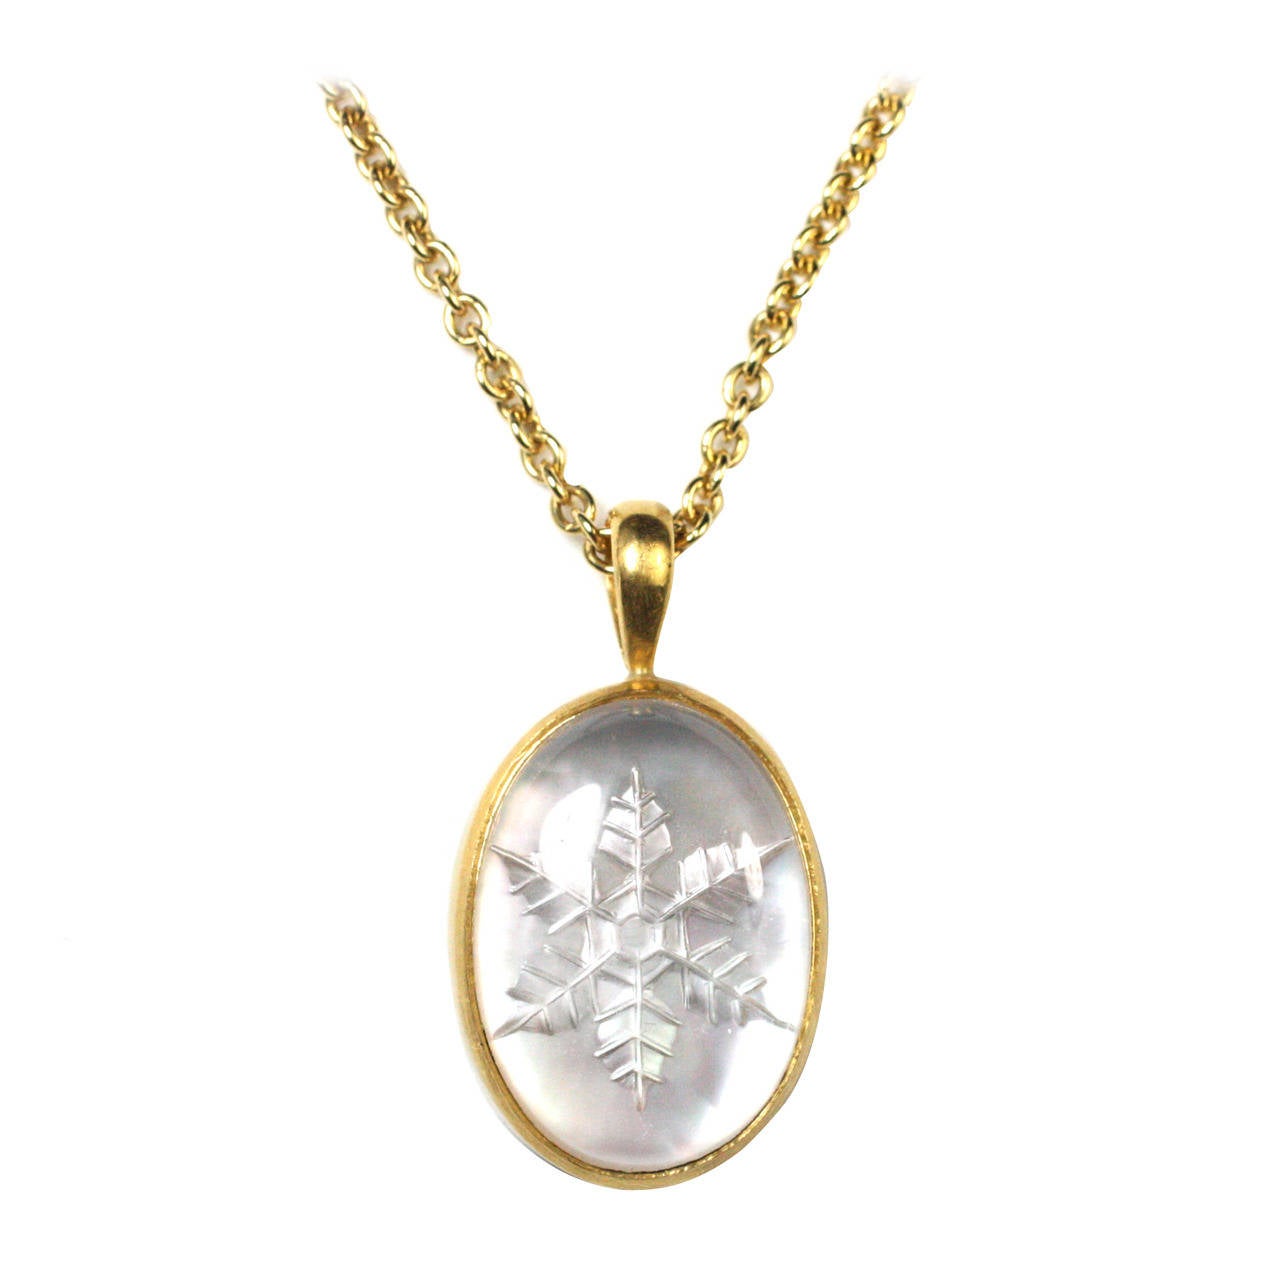 Crystal & Mother of Pearl Carved Snowflake & Gold Pendant